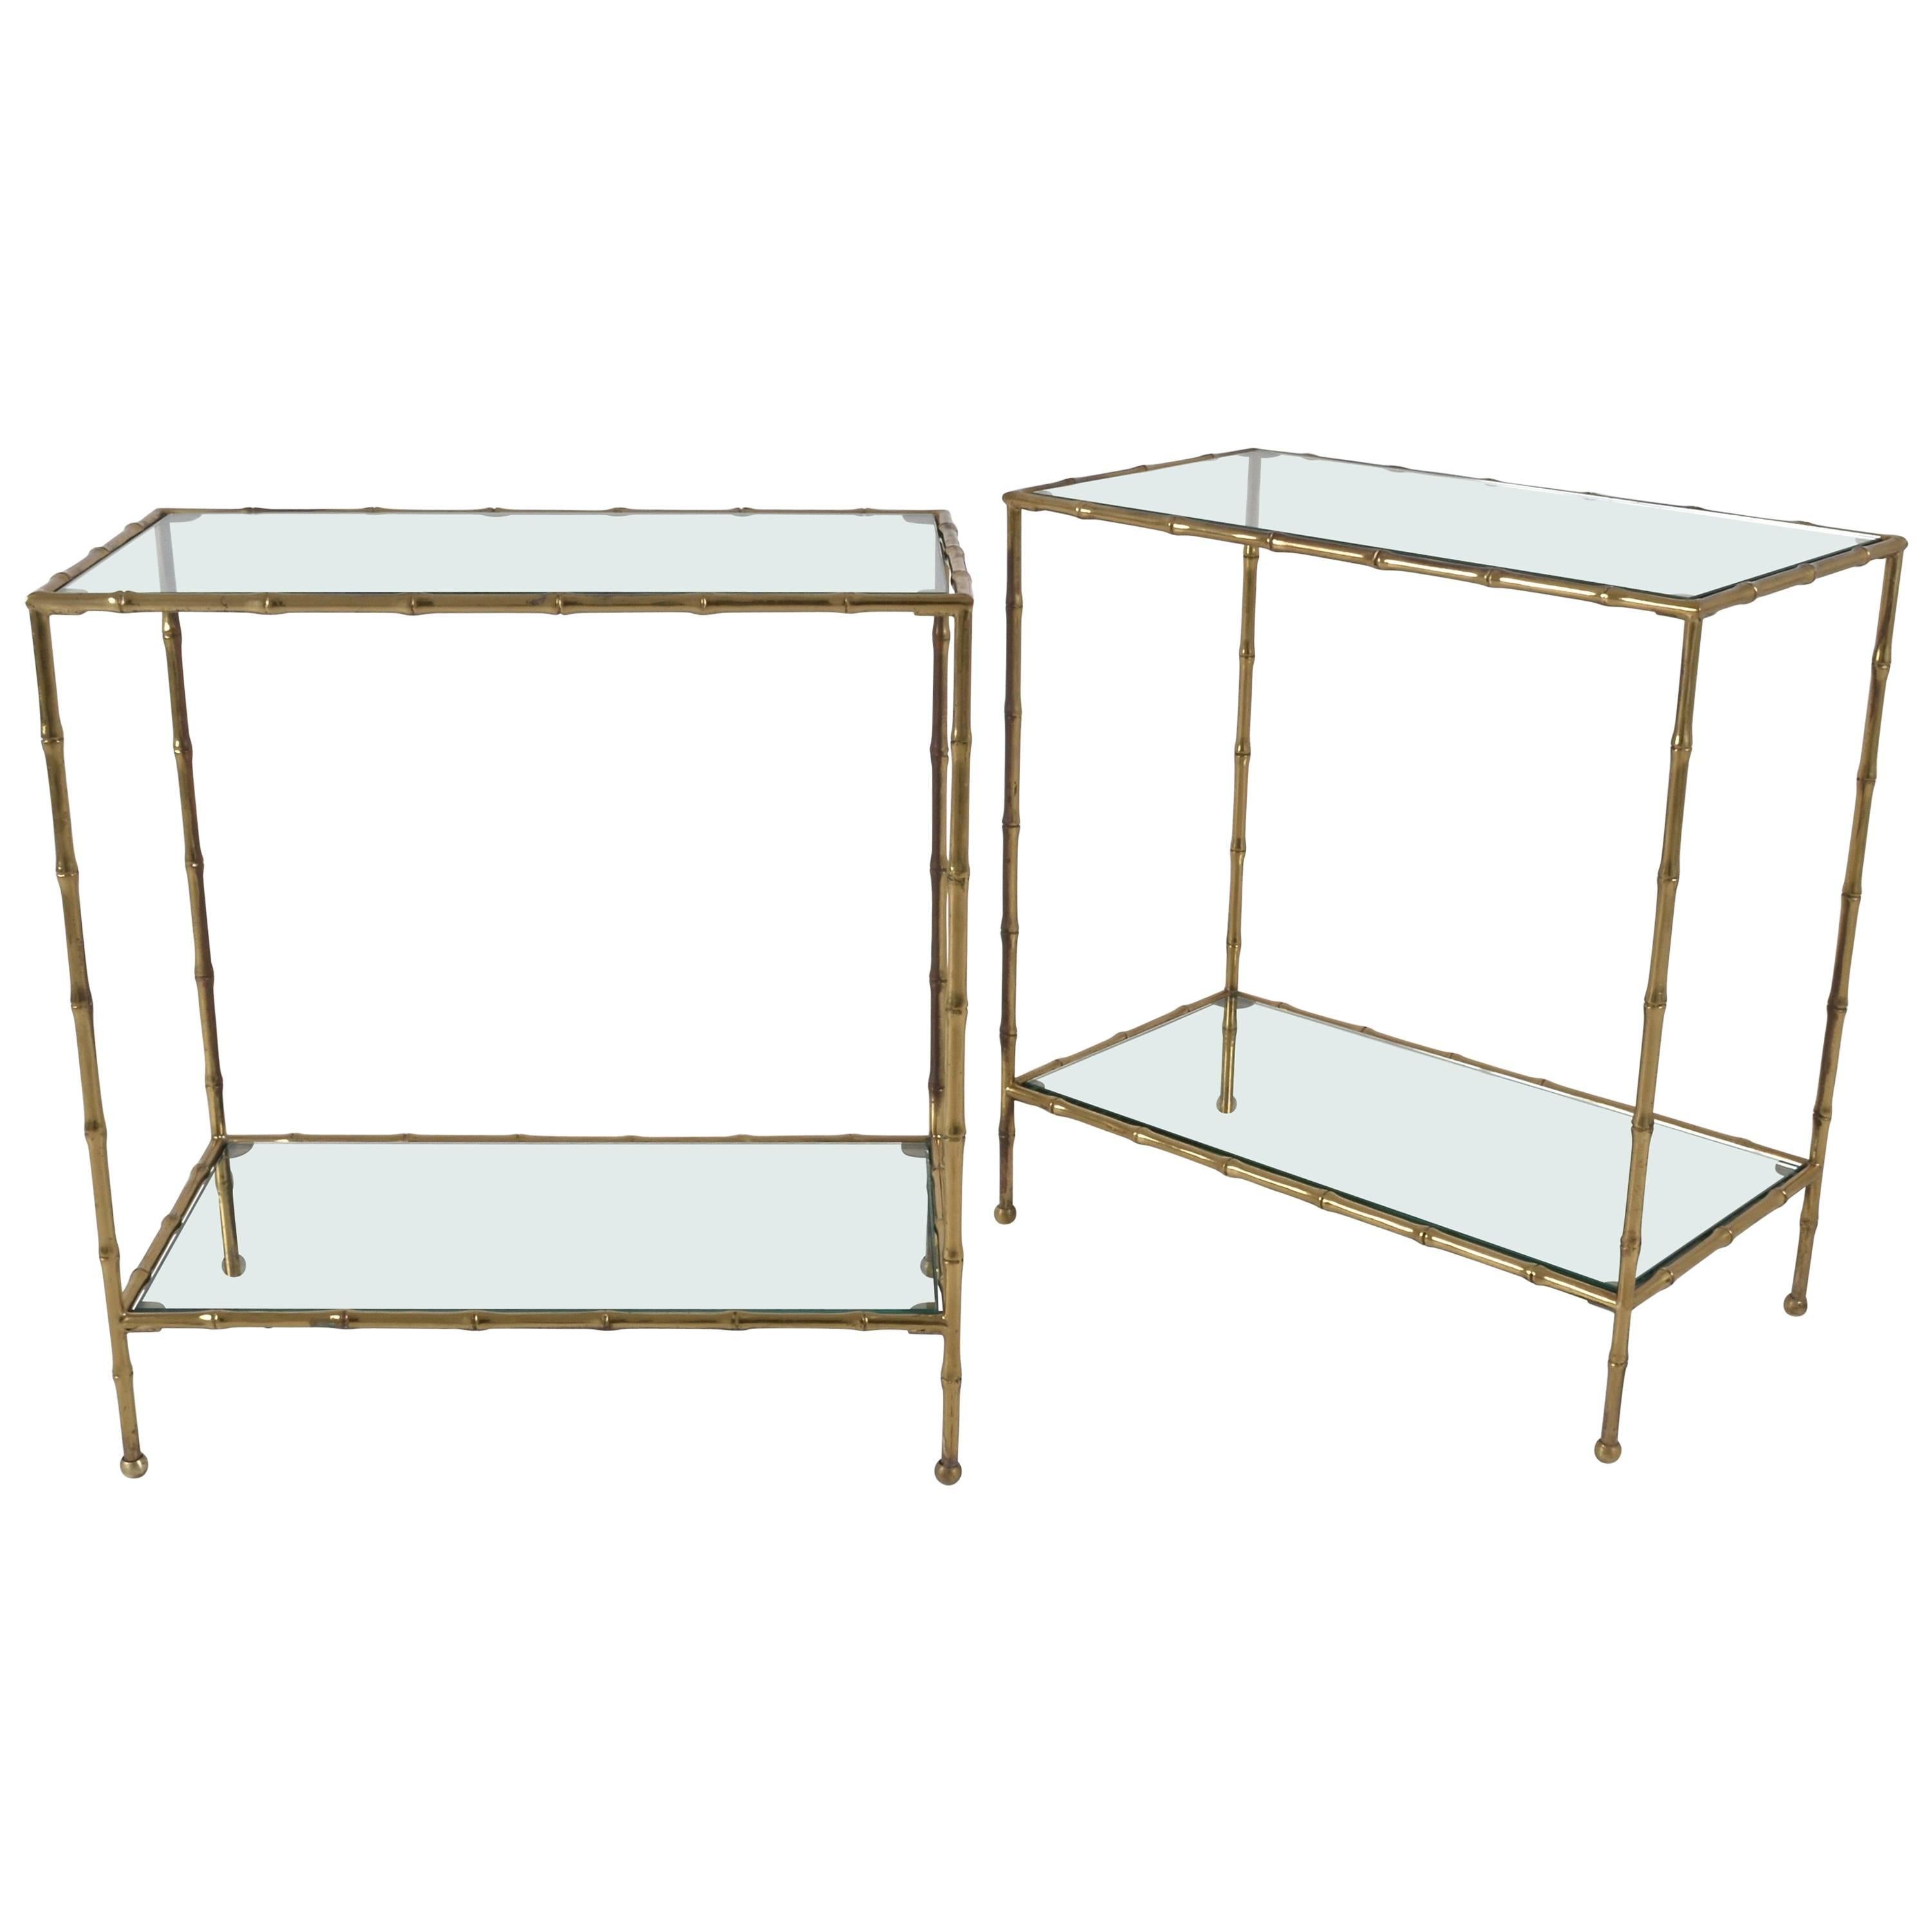 Pair of Faux Bamboo Brass Side Tables, France, 1950s